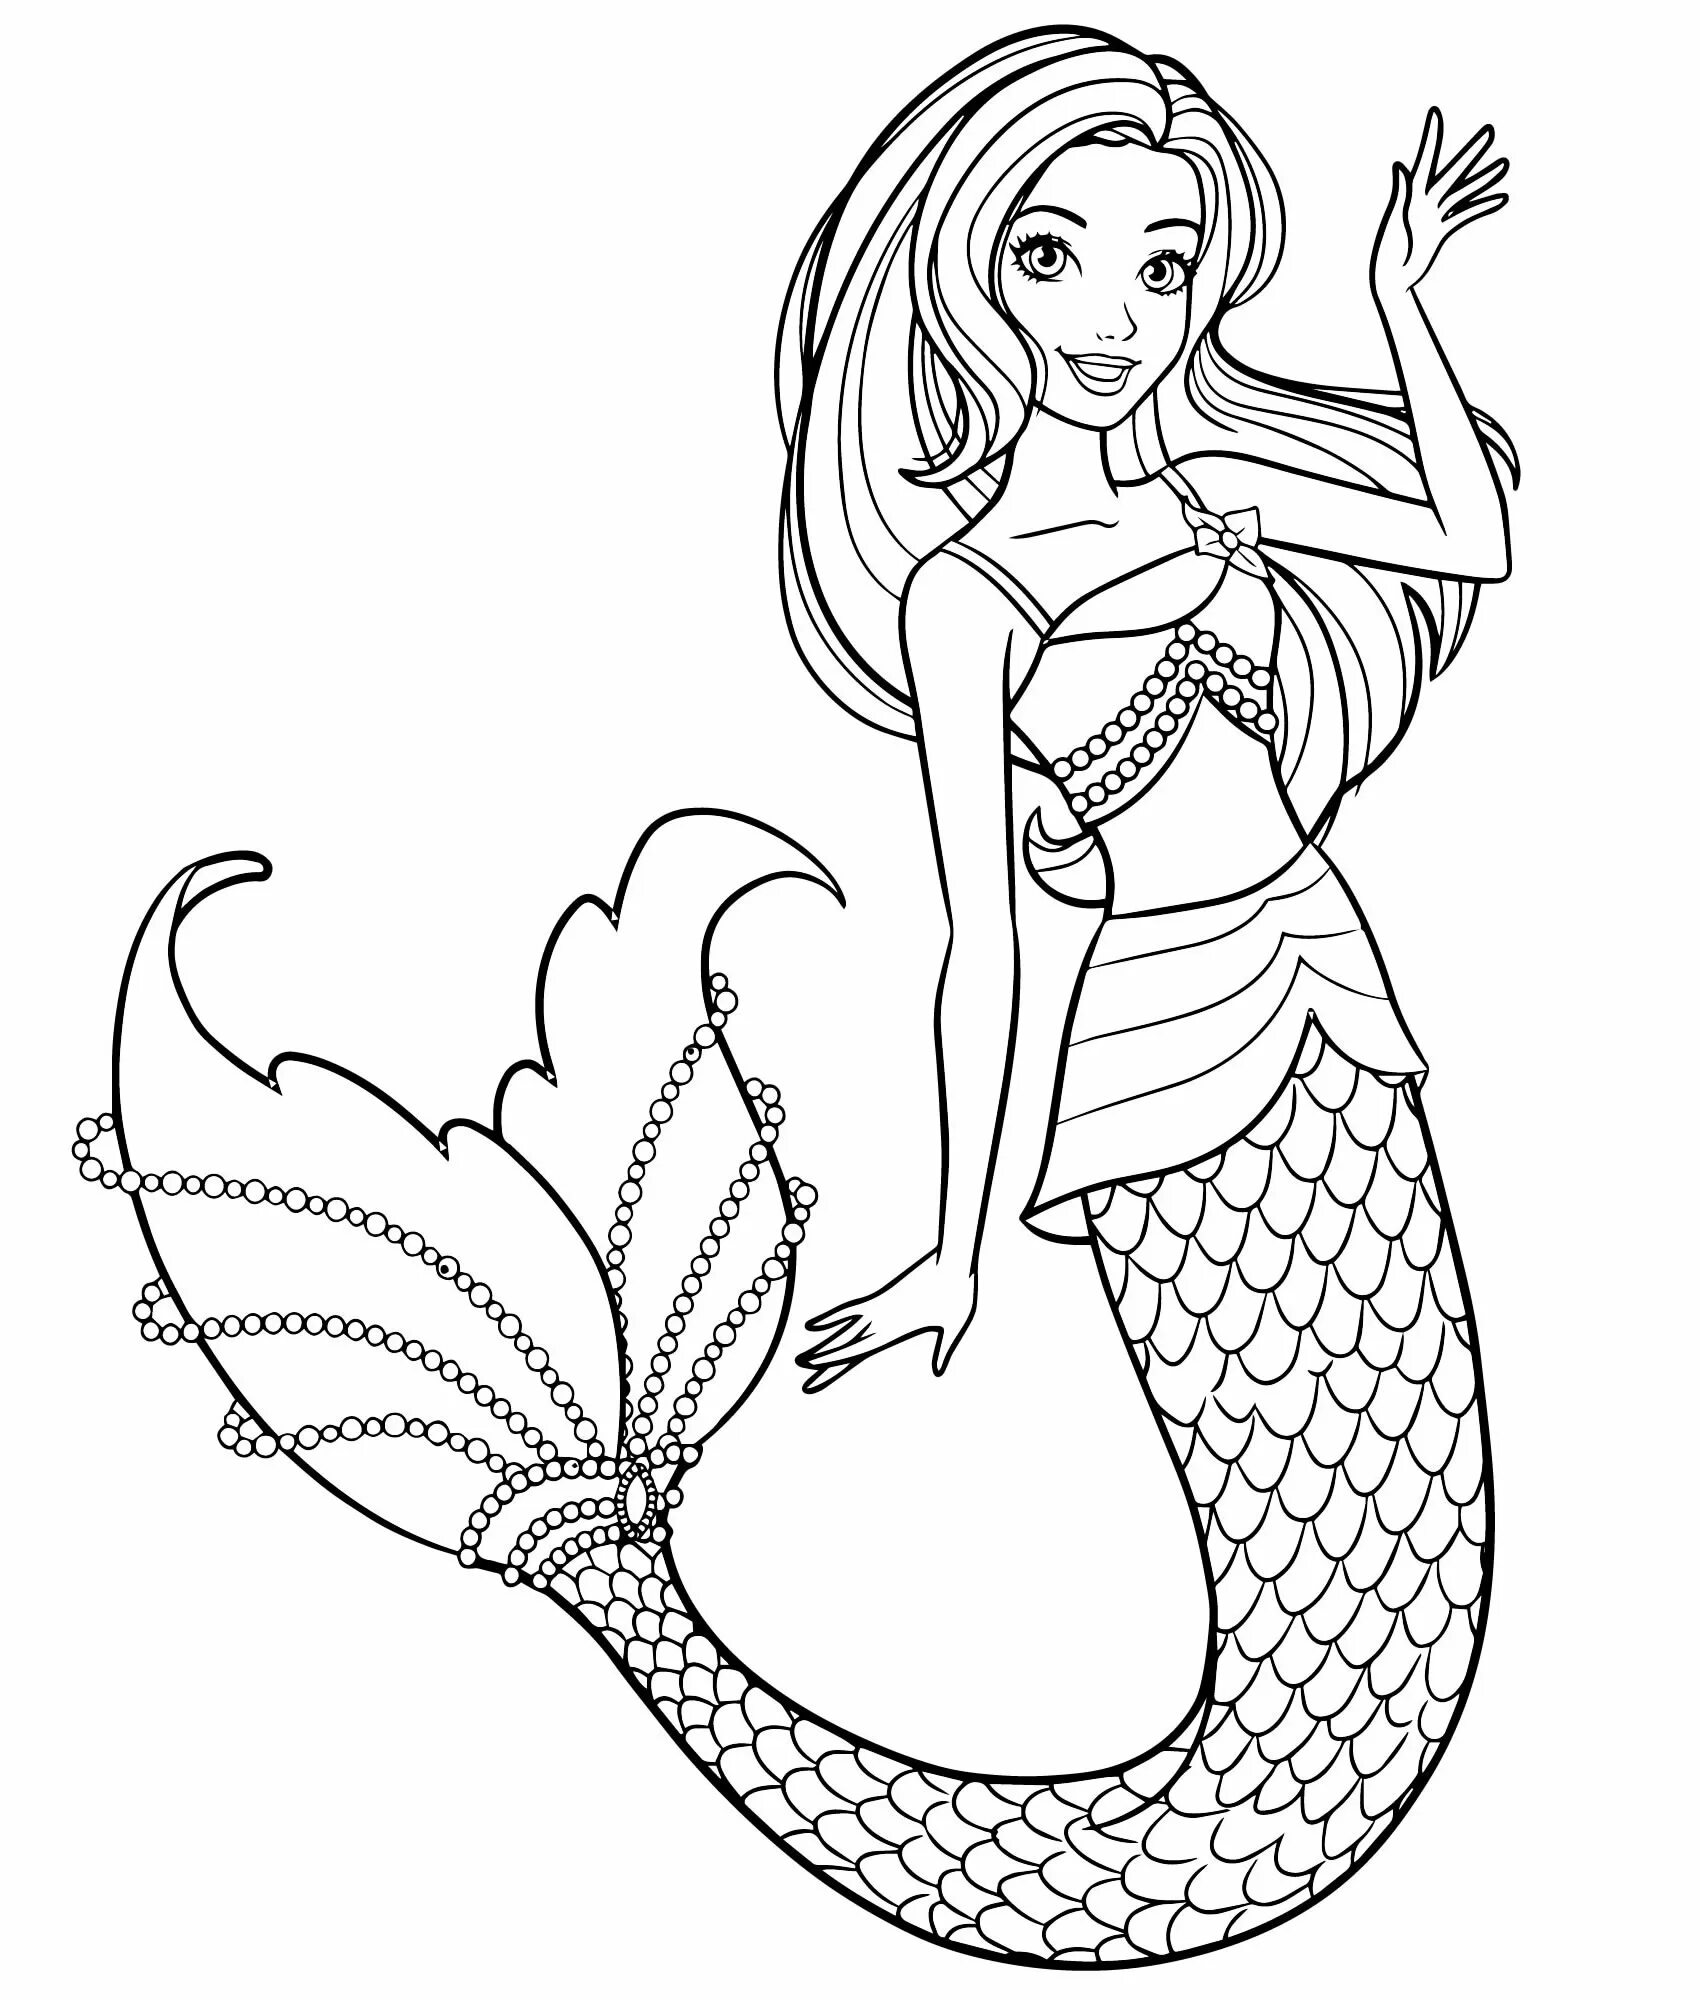 Exciting little mermaid coloring pages for girls